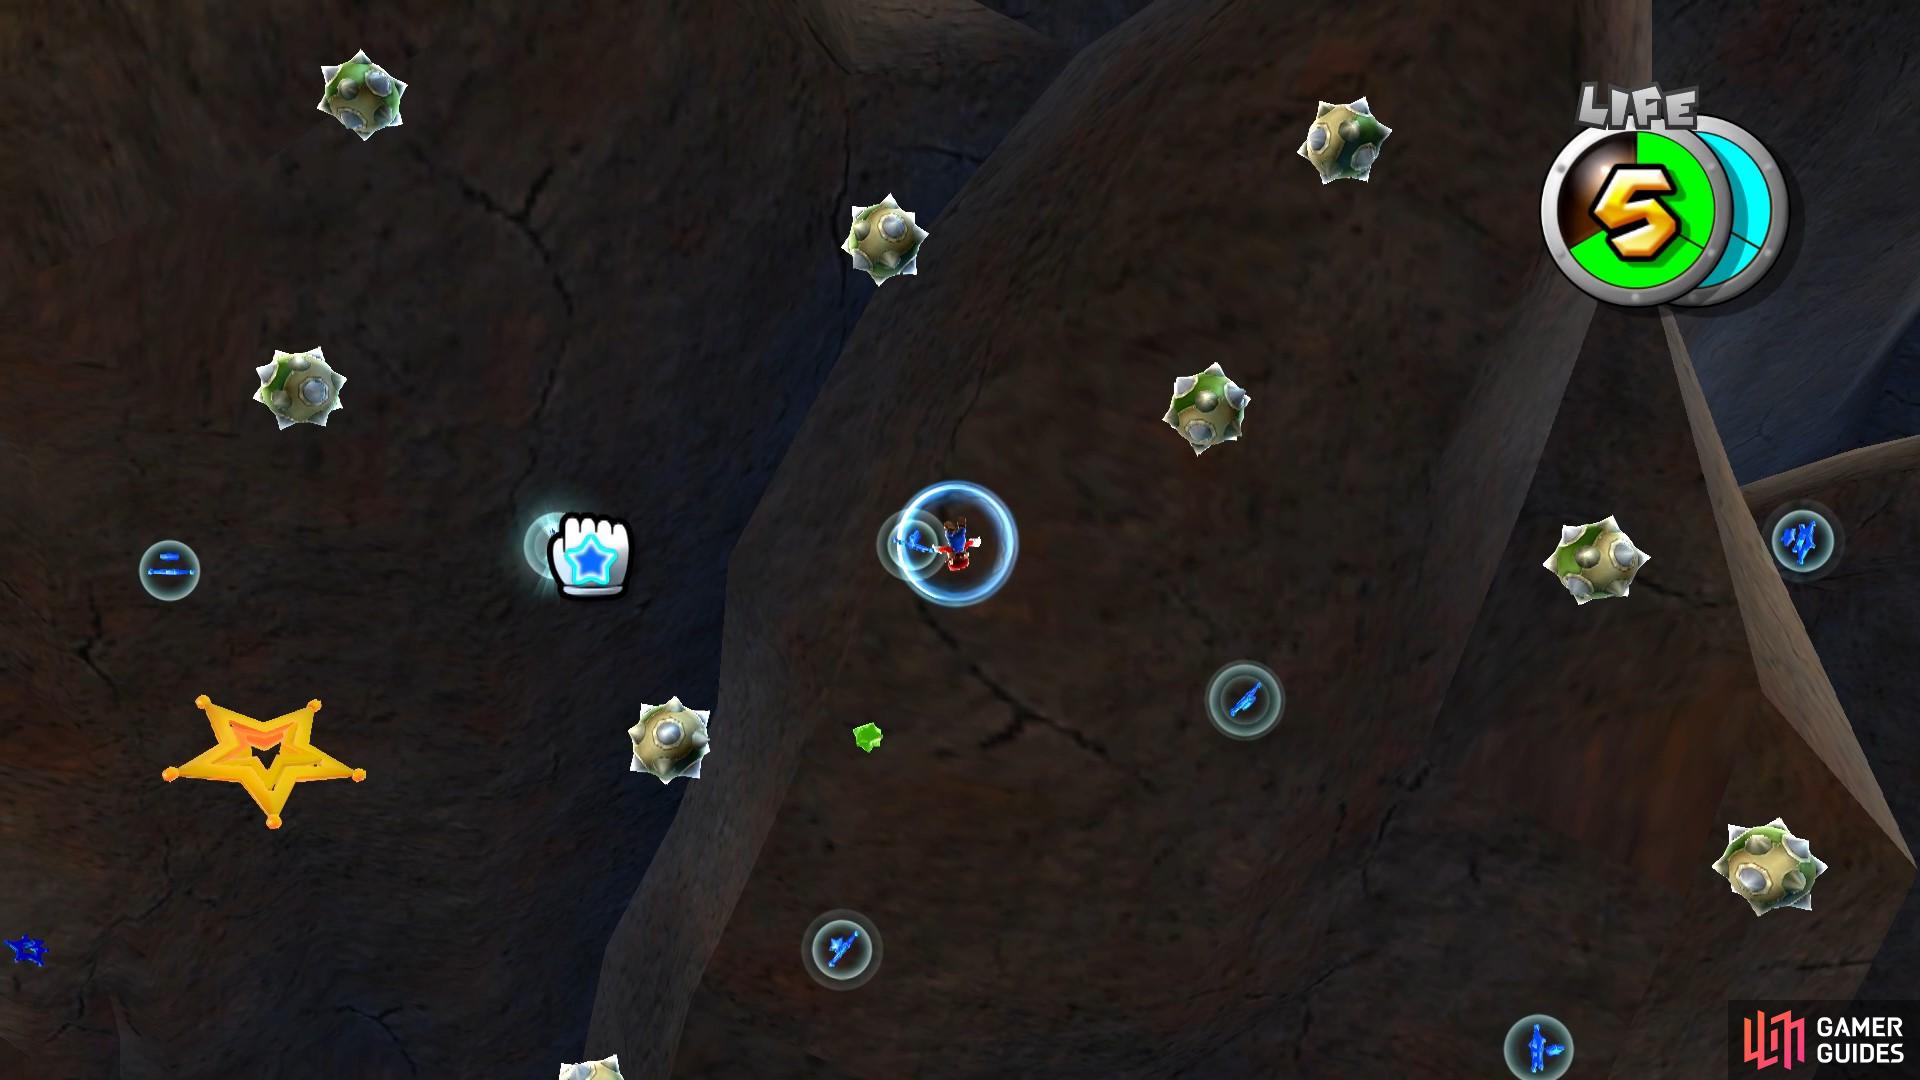 You'll need to navigate around lots of Space Mines in this level.